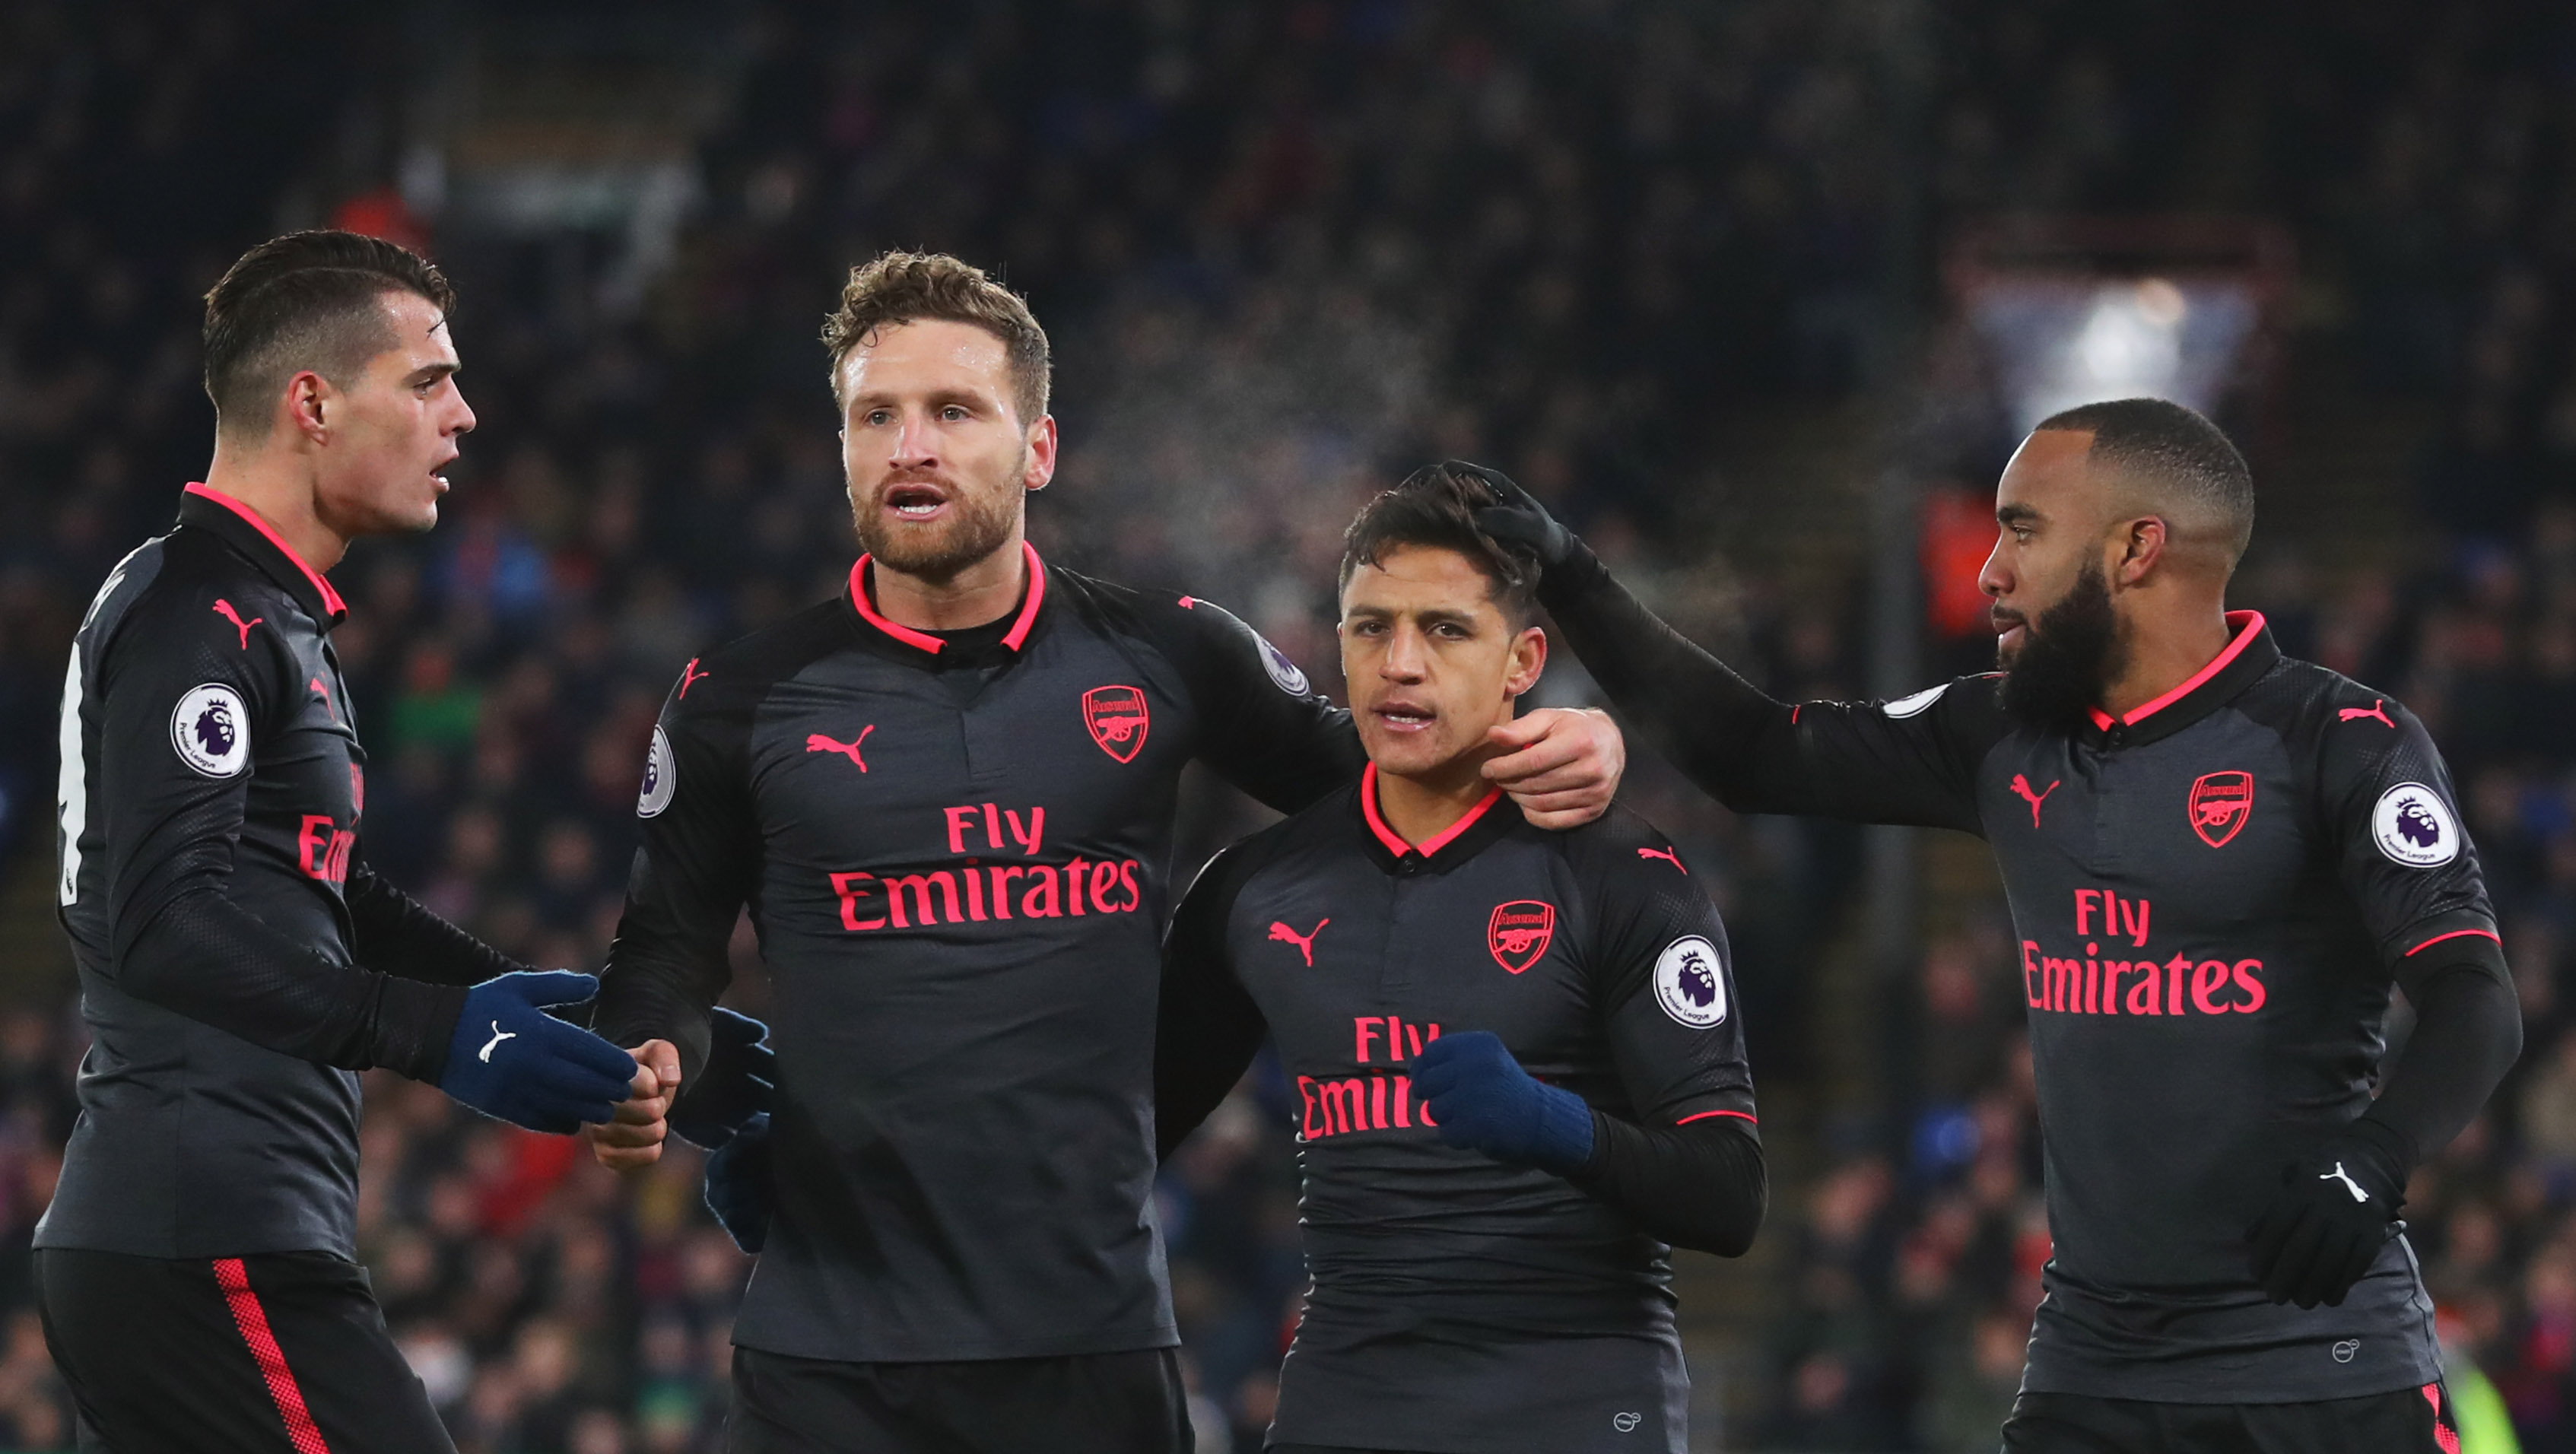 LONDON, ENGLAND - DECEMBER 28:  Alexis Sanchez of Arsenal (2R) celebrates as he scores their second goal with Granit Xhaka, Shkodran Mustafi and Alexandre Lacazette during the Premier League match between Crystal Palace and Arsenal at Selhurst Park on December 28, 2017 in London, England.  (Photo by Catherine Ivill/Getty Images)